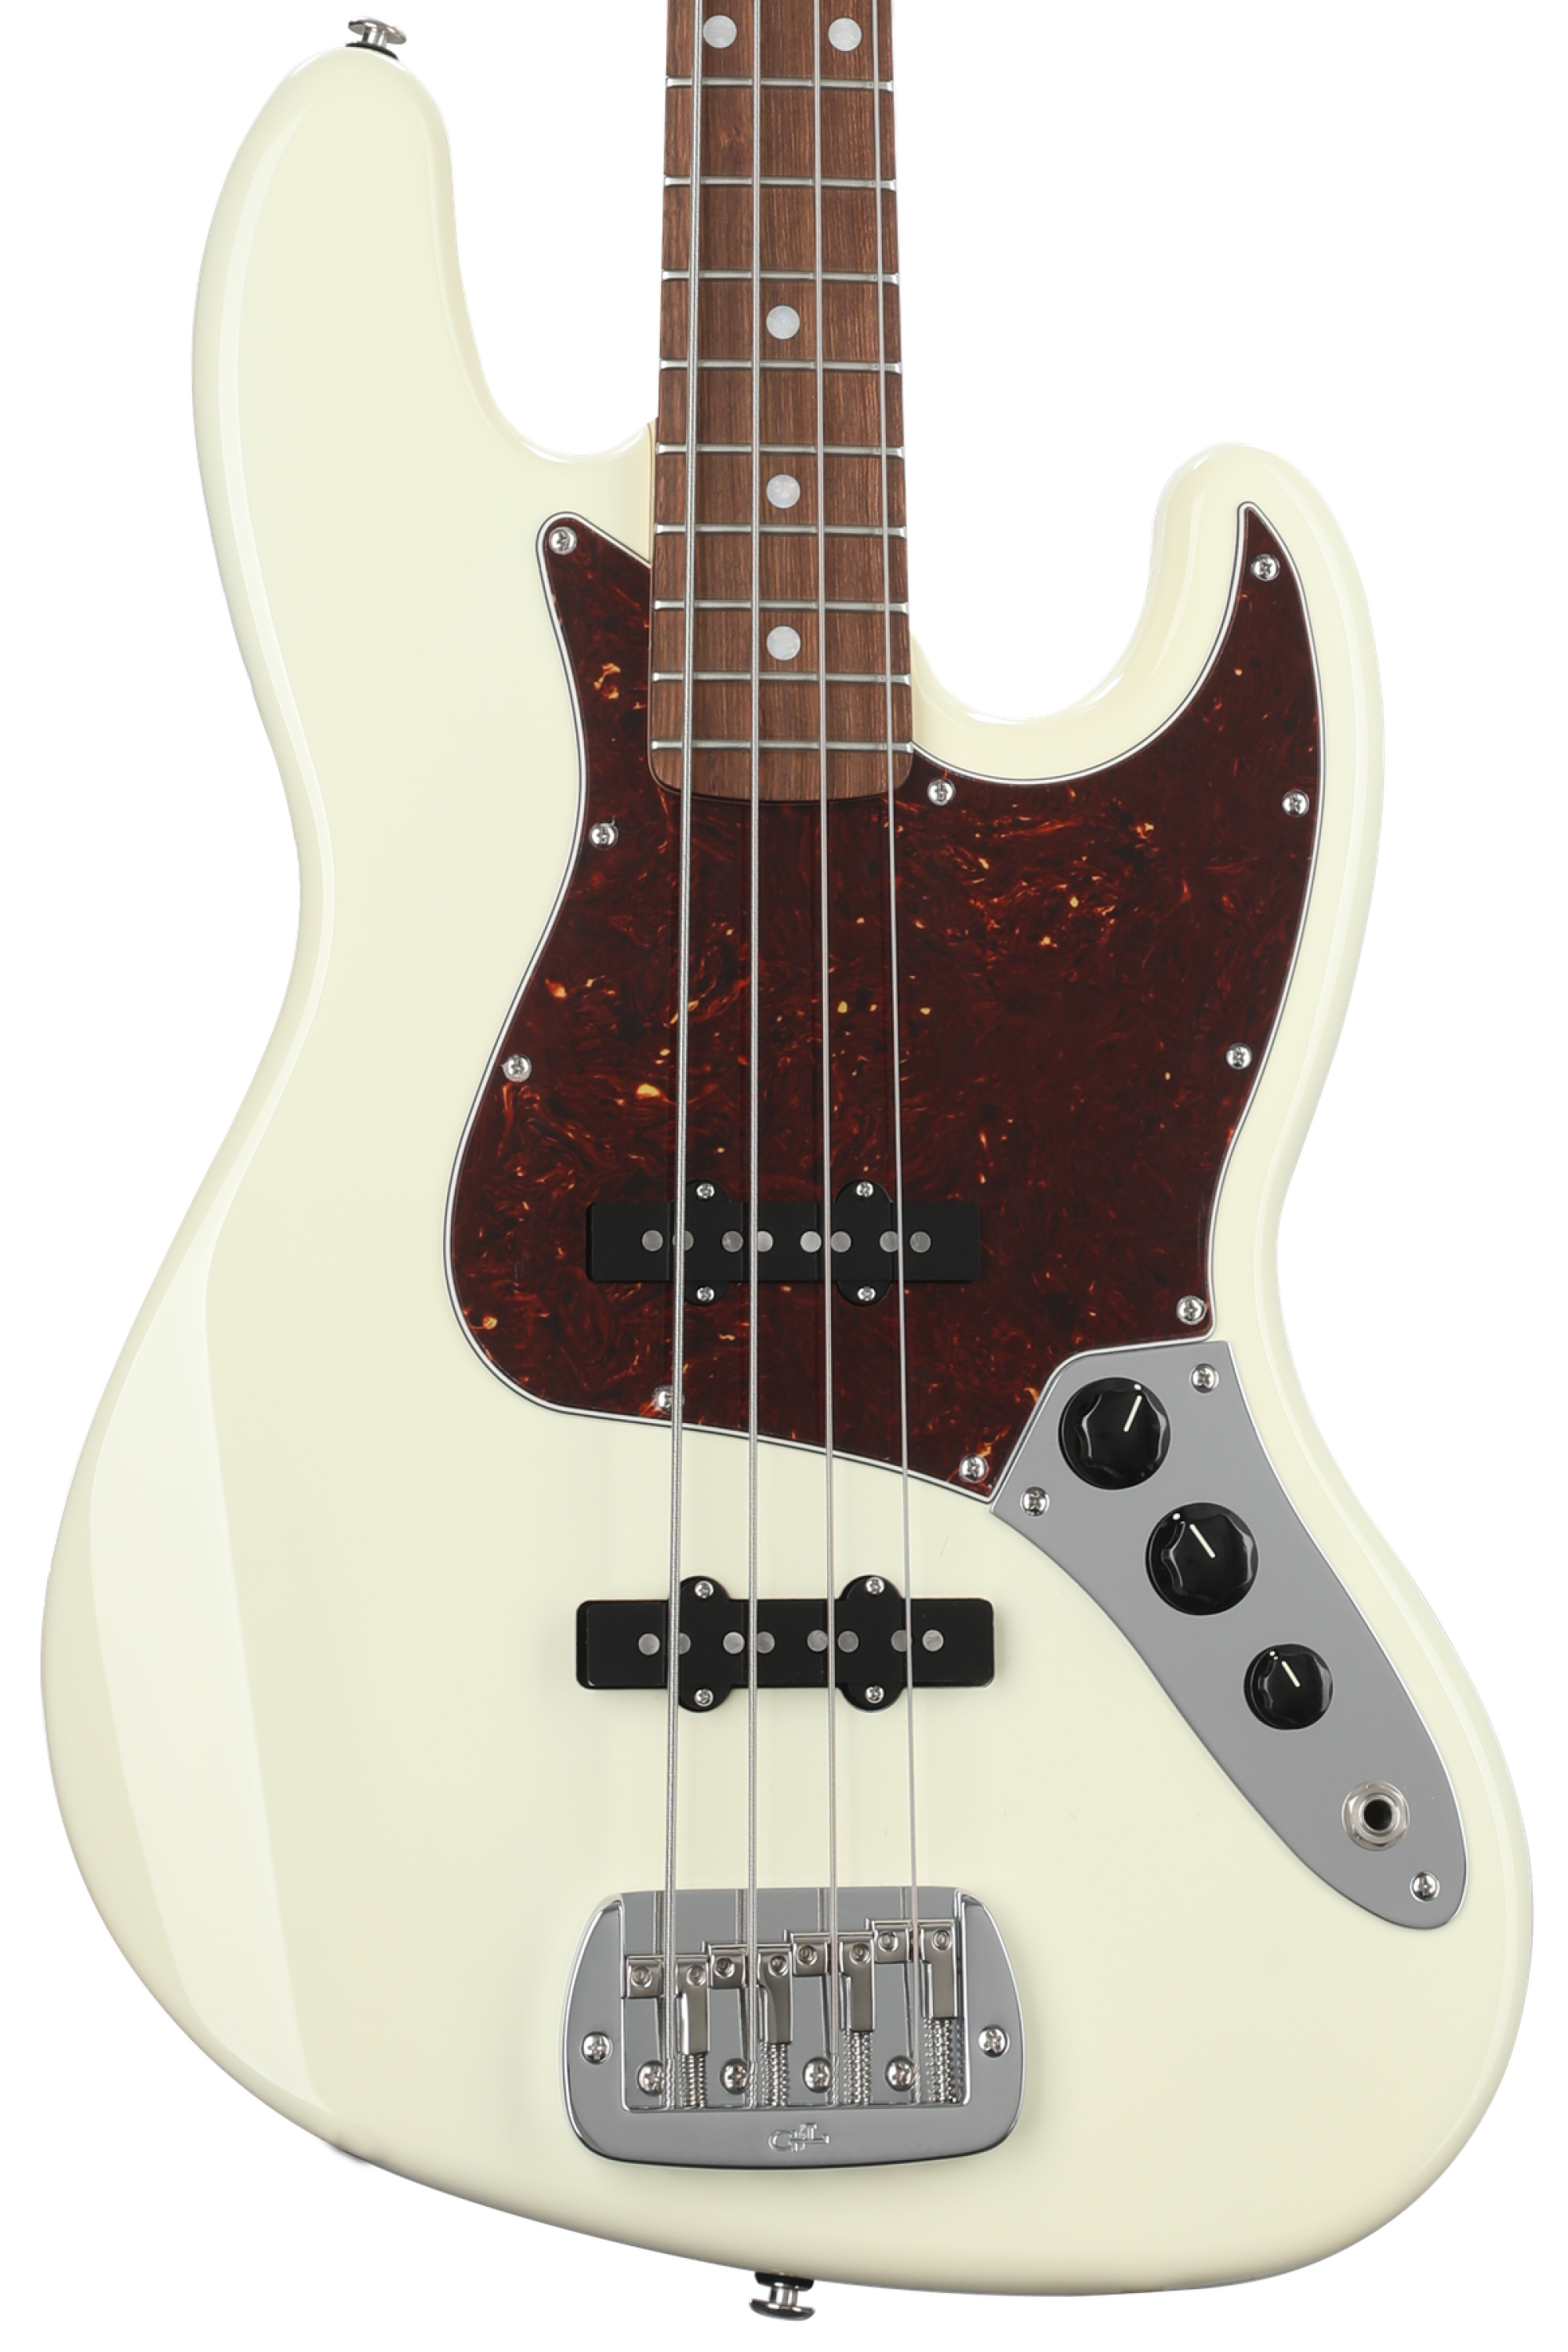 G&L Fullerton Deluxe JB Bass Guitar - Vintage White with Caribbean 